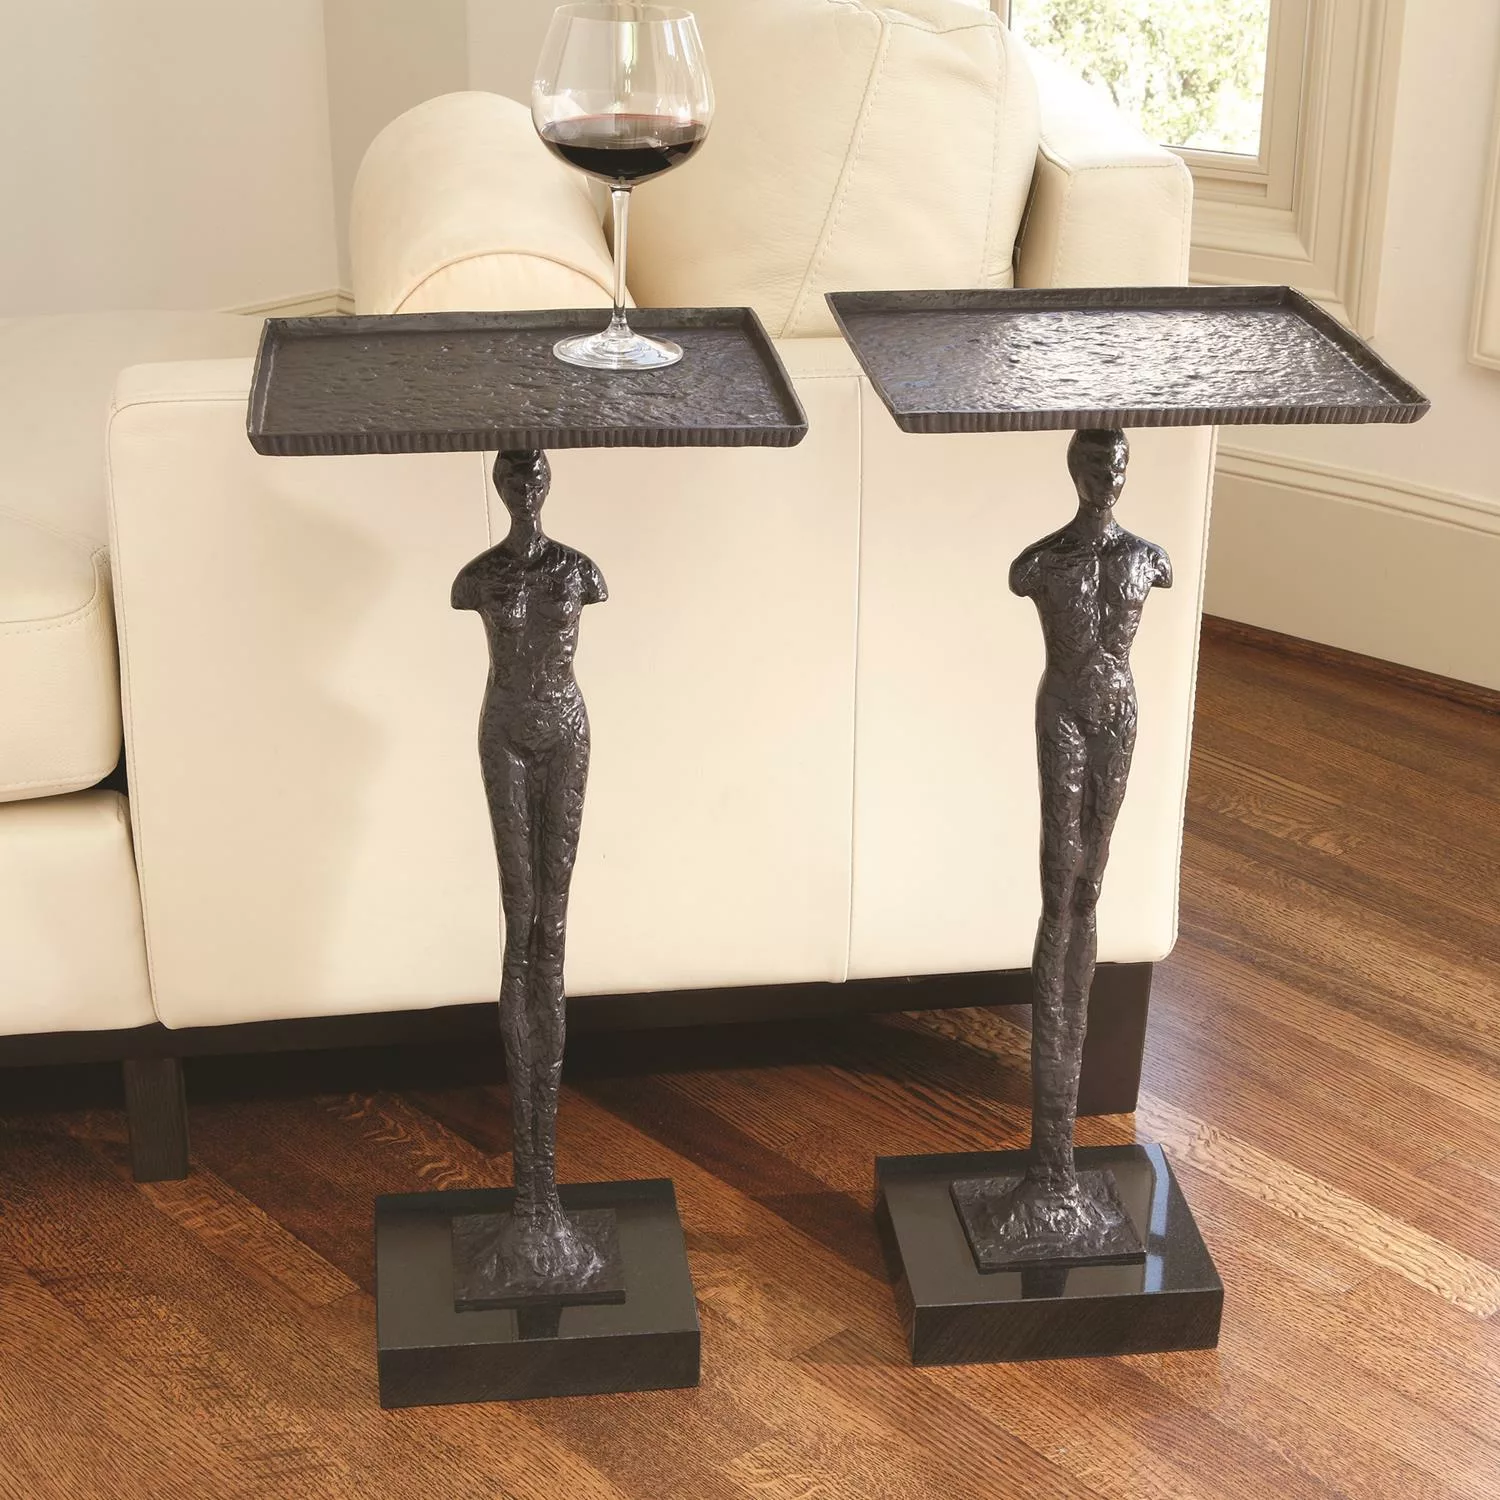 two side tables with a glass of wine on top